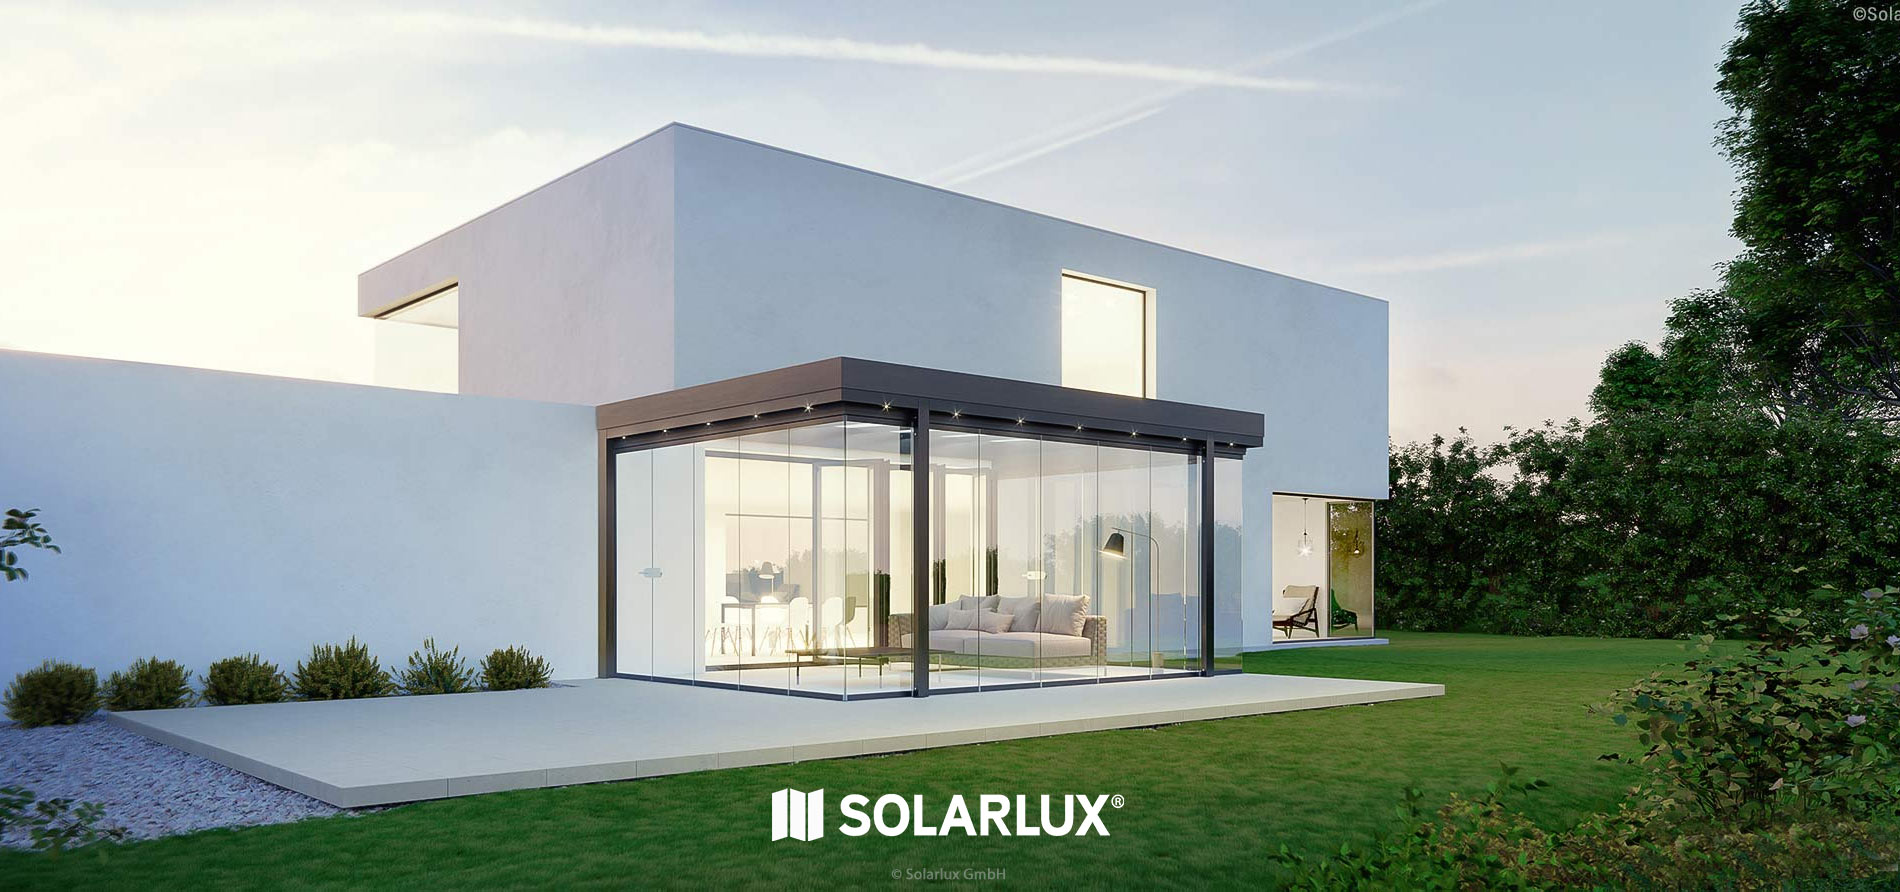 Solarlux Acubis glass room